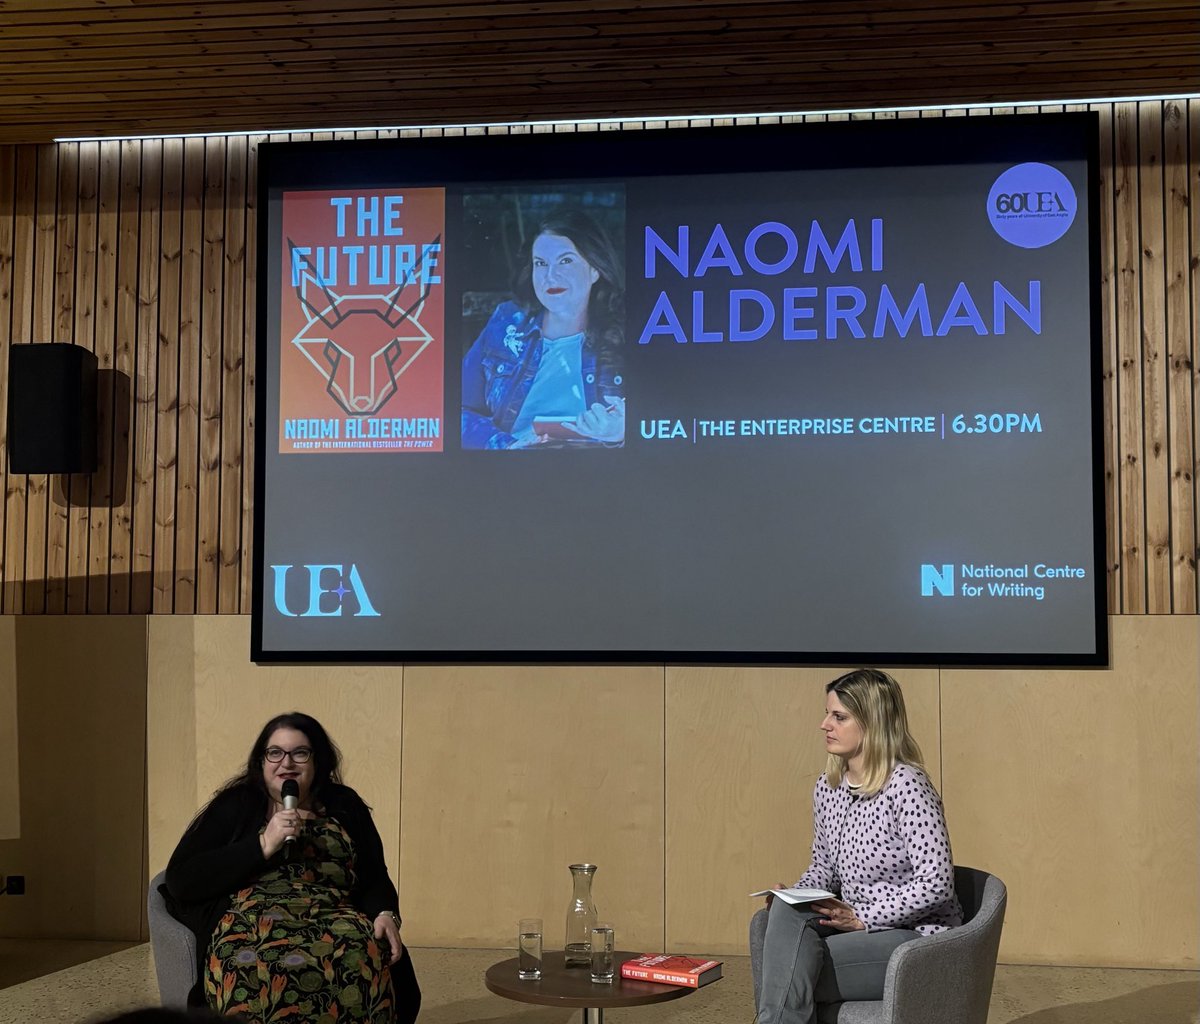 A fascinating dive into #TheFuture ⁦@UEALitFest⁩ ⁦@WritersCentre⁩ with ⁦@uniofeastanglia⁩ ⁦@uealdc⁩ alumna #NaomiAlderman. We are living through a third age of information chaos but will find a new rhythm & there are reasons to be hopeful!